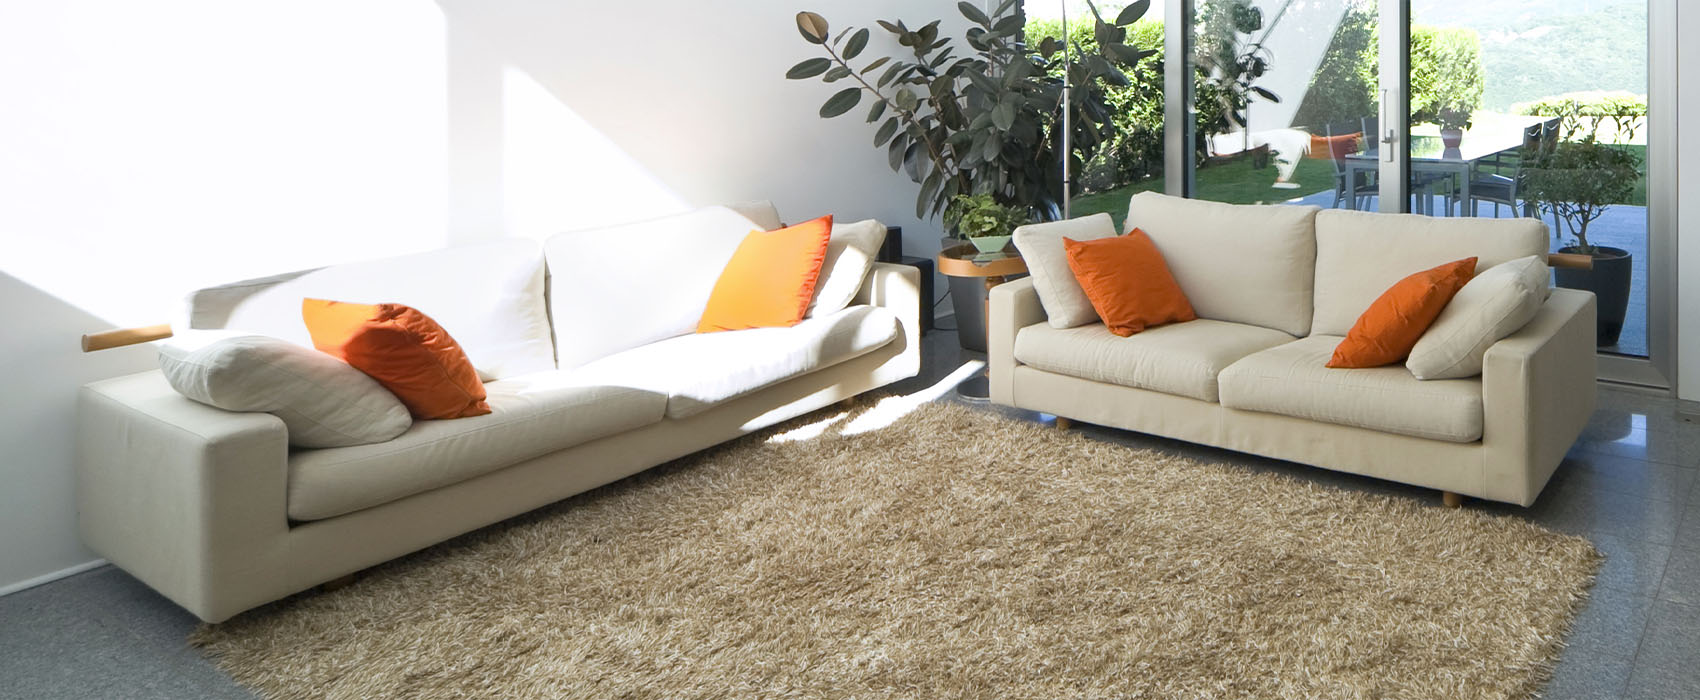 Carpet Cleaning Video Gallery - A & A Spectrum